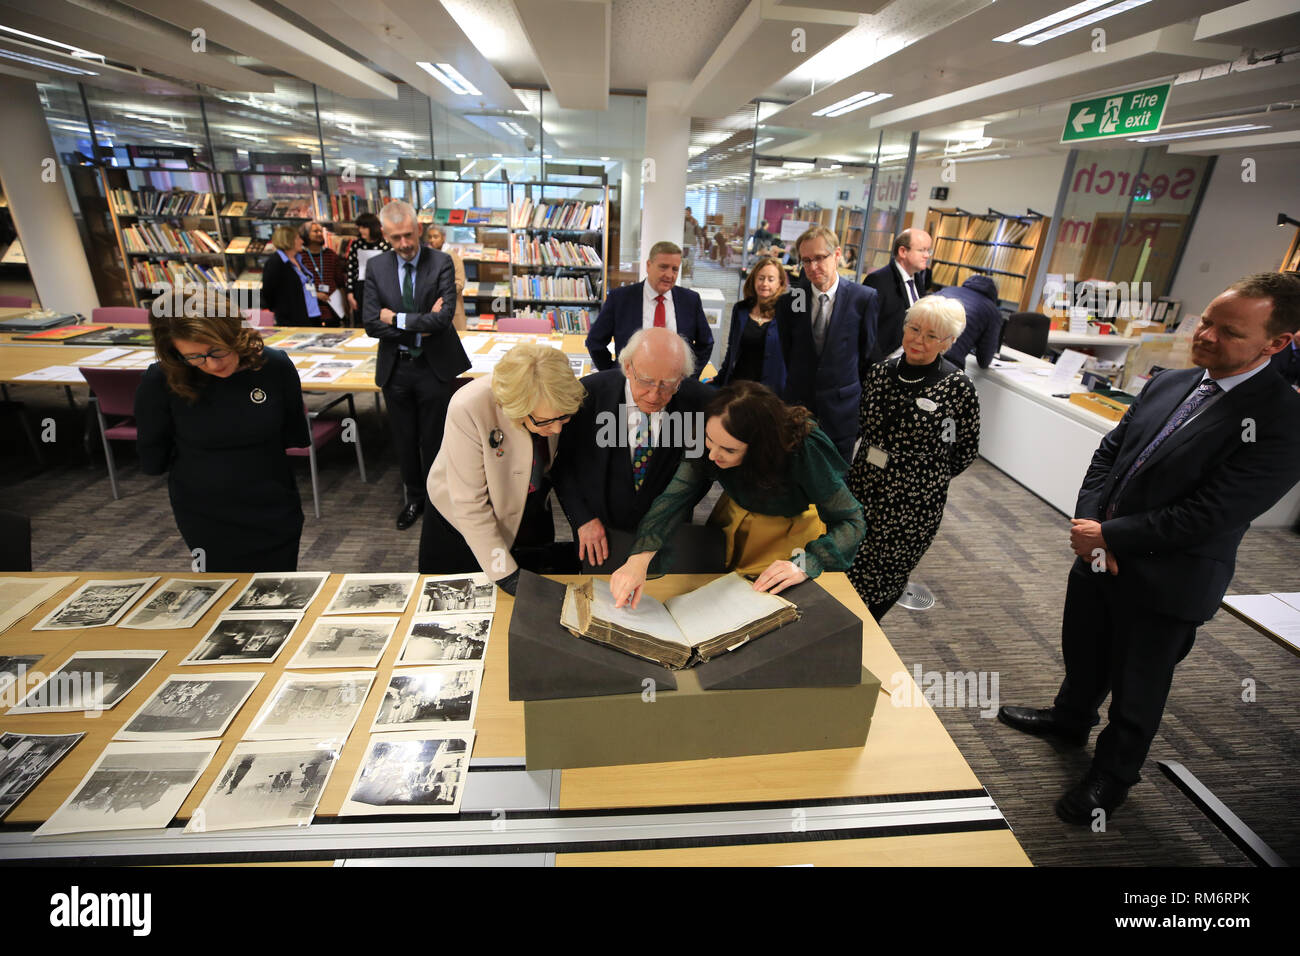 (Left to right) Sabina Coyne, Irish President Michael D Higgins and Liverpool Central Library's First Writer-in-Residence Catherine Morris view historical archive records related to Ireland and emigration, during the President's visit to Liverpool Central Library on the third day of an official visit to the UK. Stock Photo